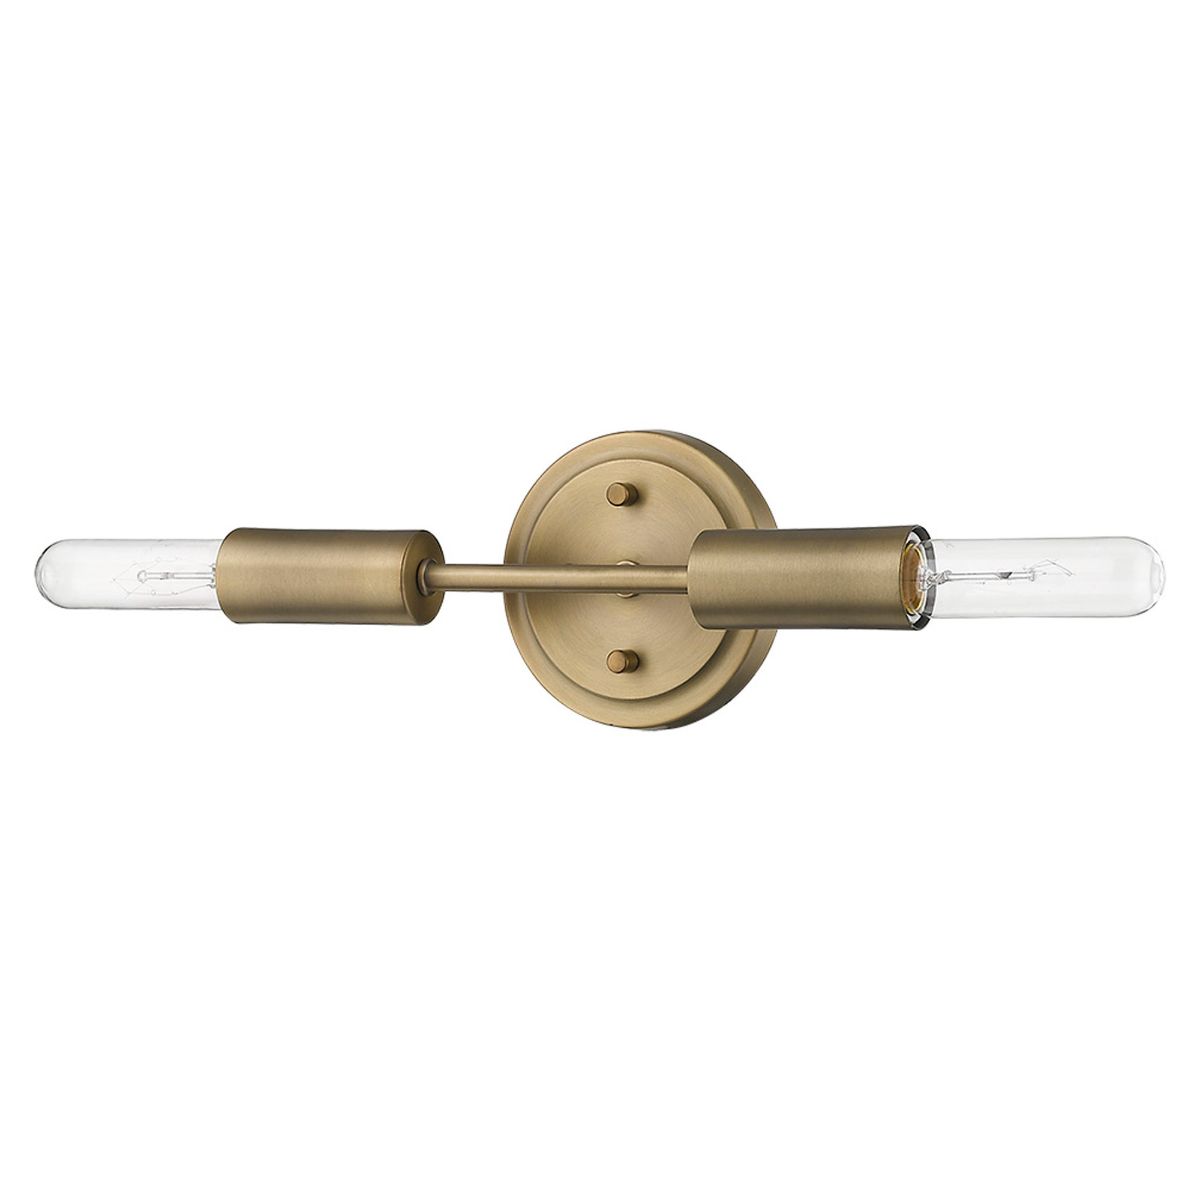 Perret 12 in. Armed Sconce Brass Finish